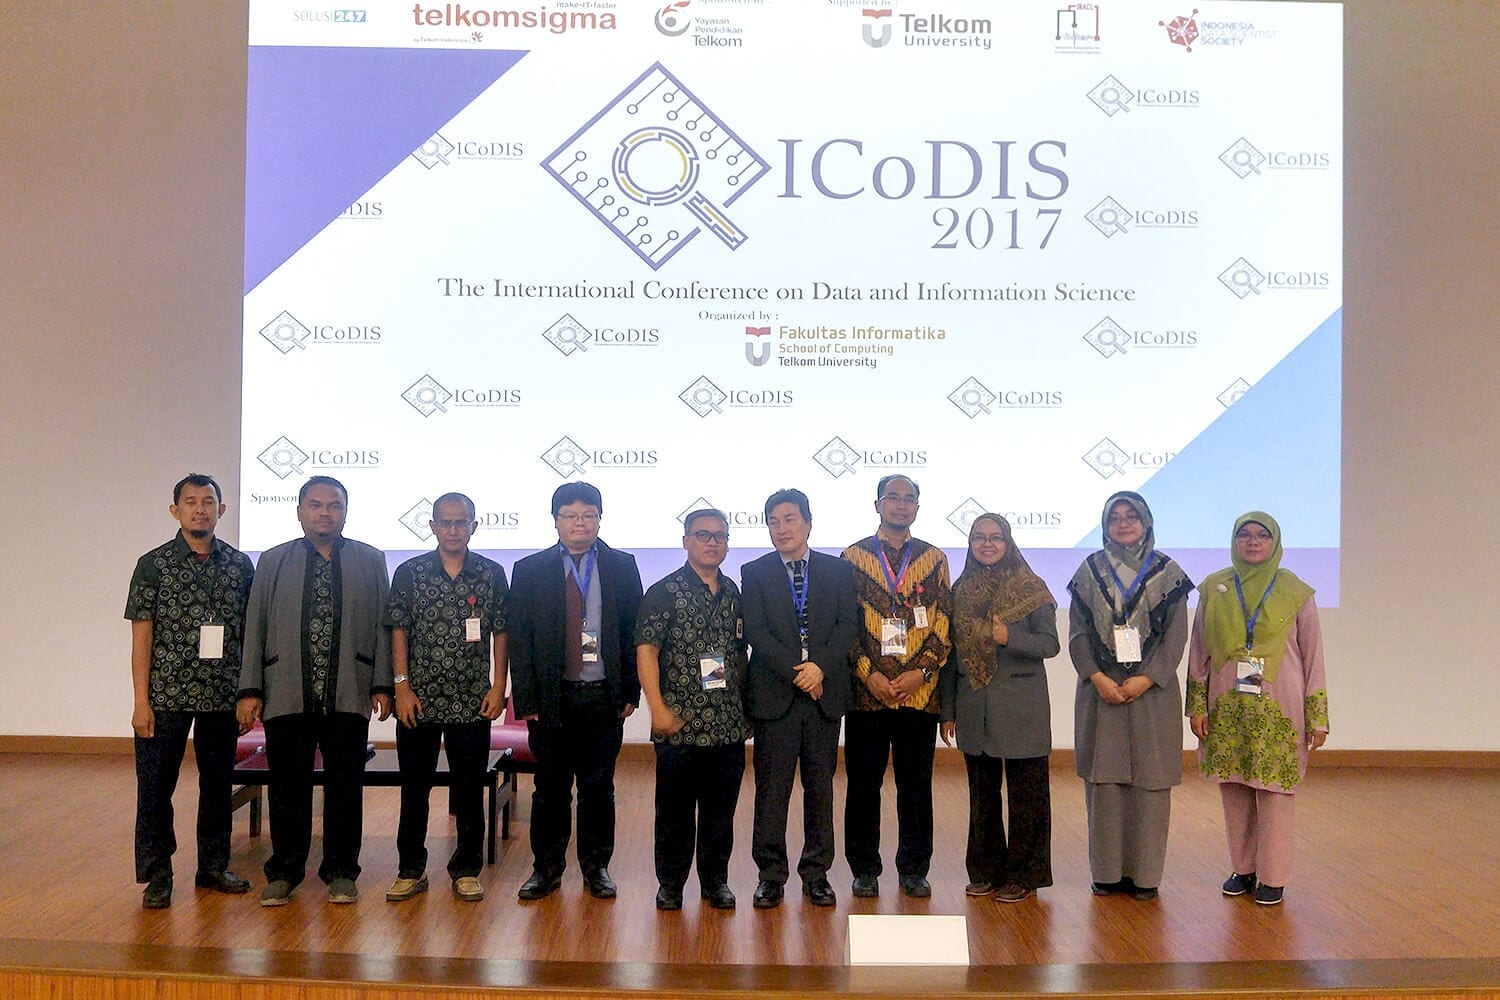 The Faculty of Informatics Has Successfully Organized the International Conference on Data and Information Science (ICoDIS) 2017